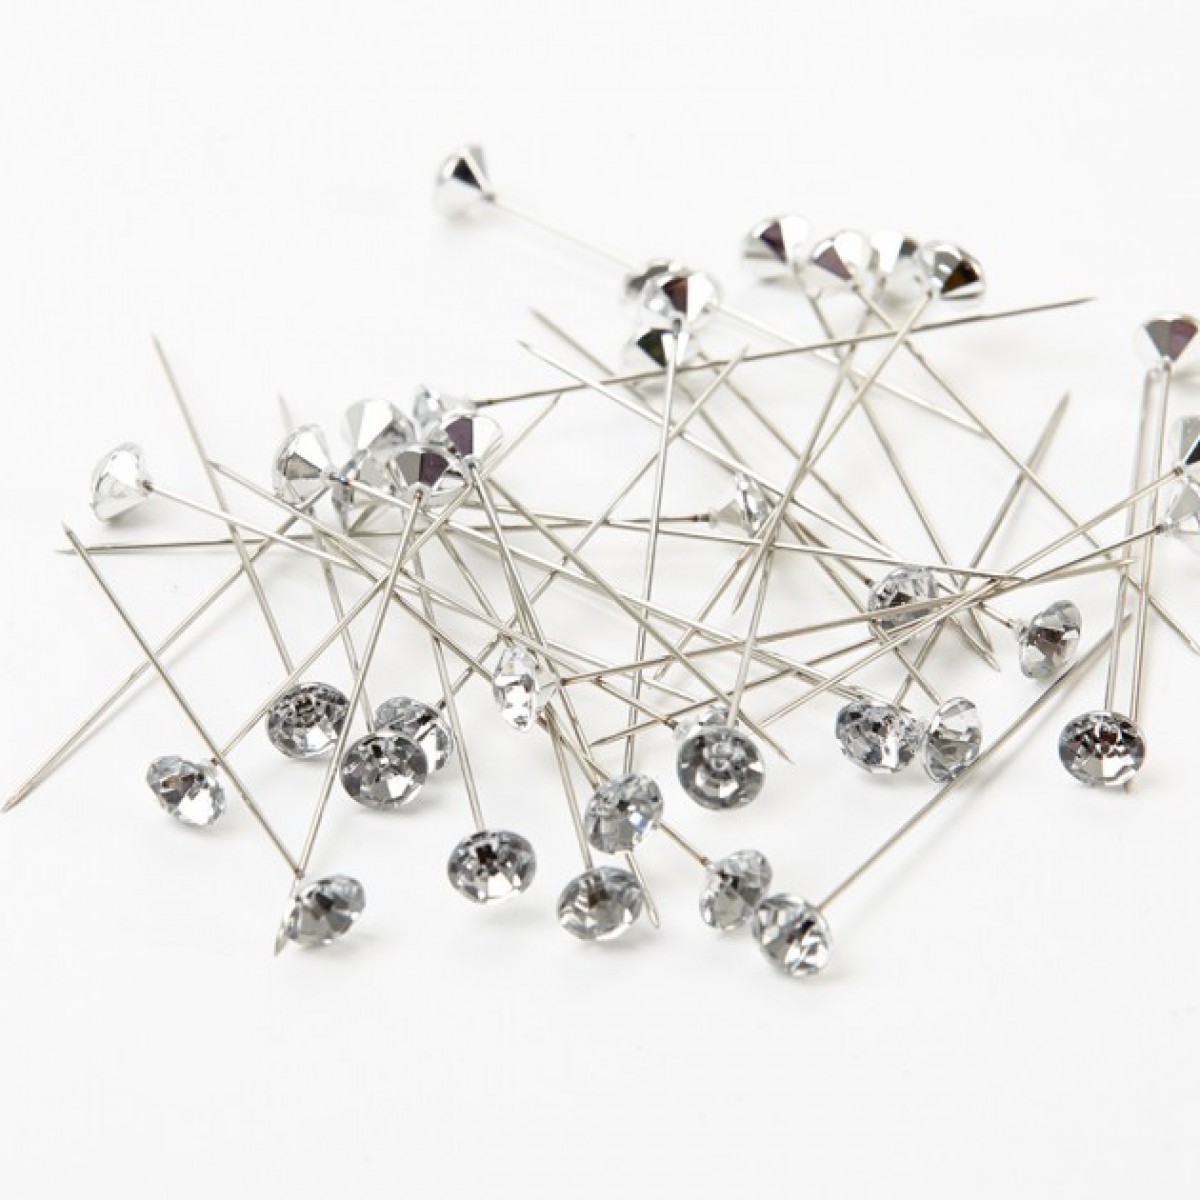 4172 Sparkle Pin Light Silver 8mm 100 Pins